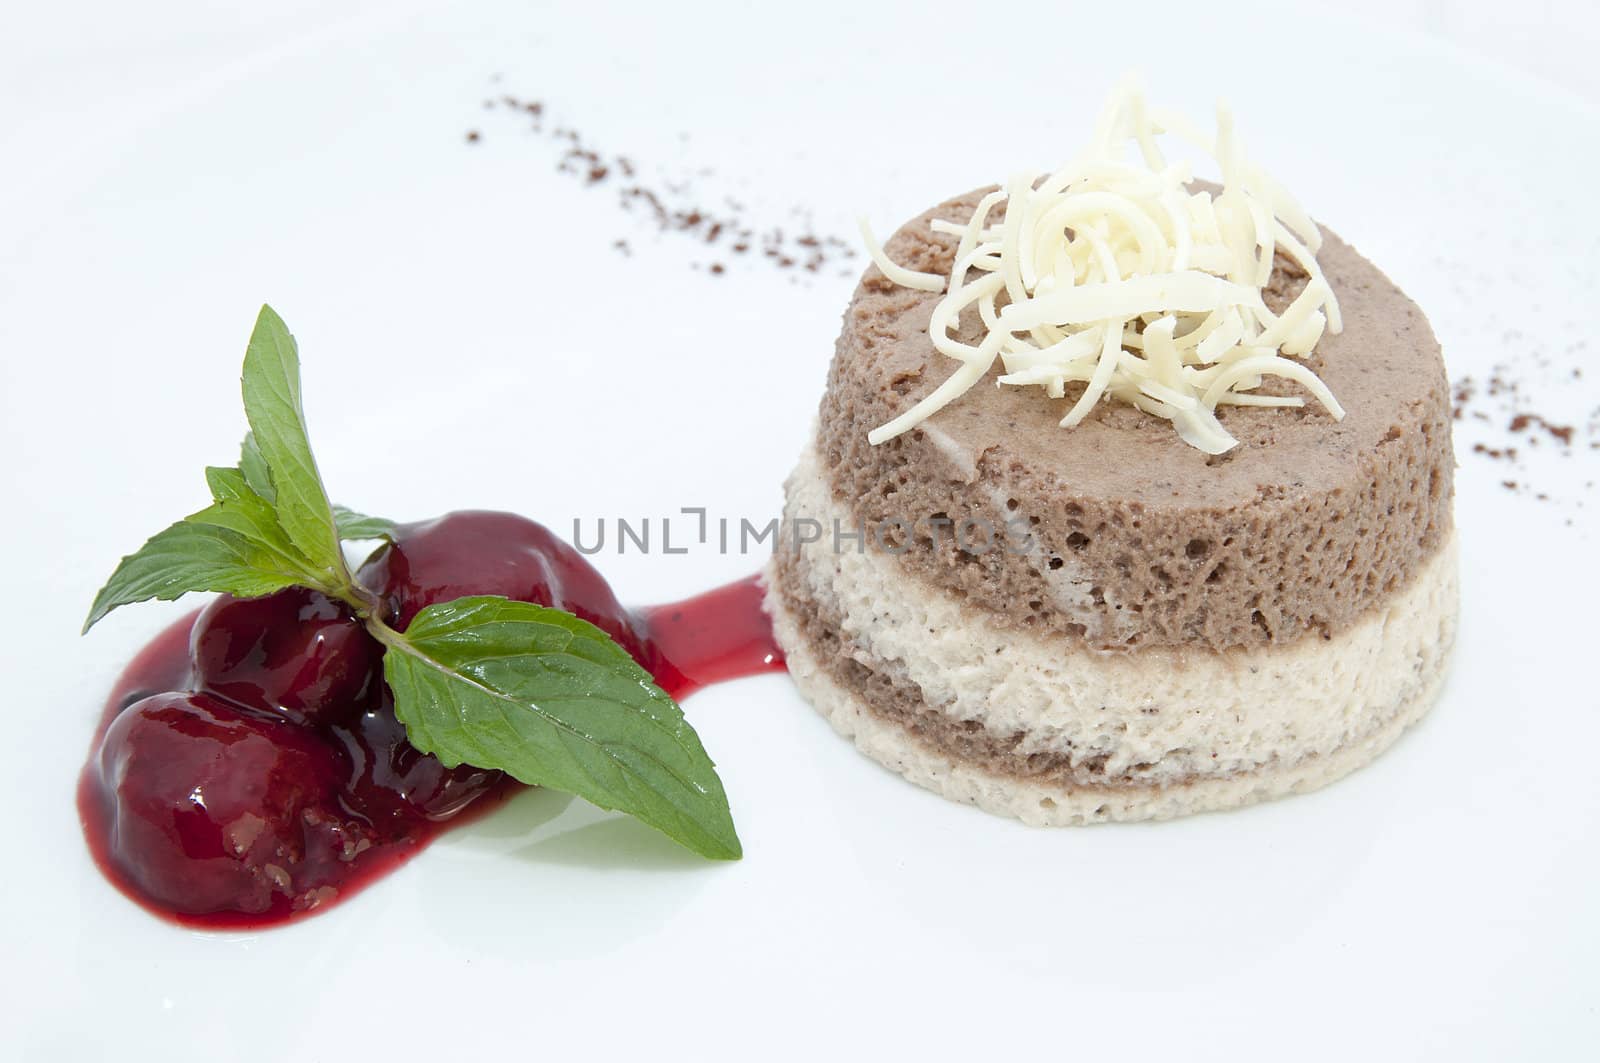 creamy chocolate desserts and ice cream on a white background by Lester120